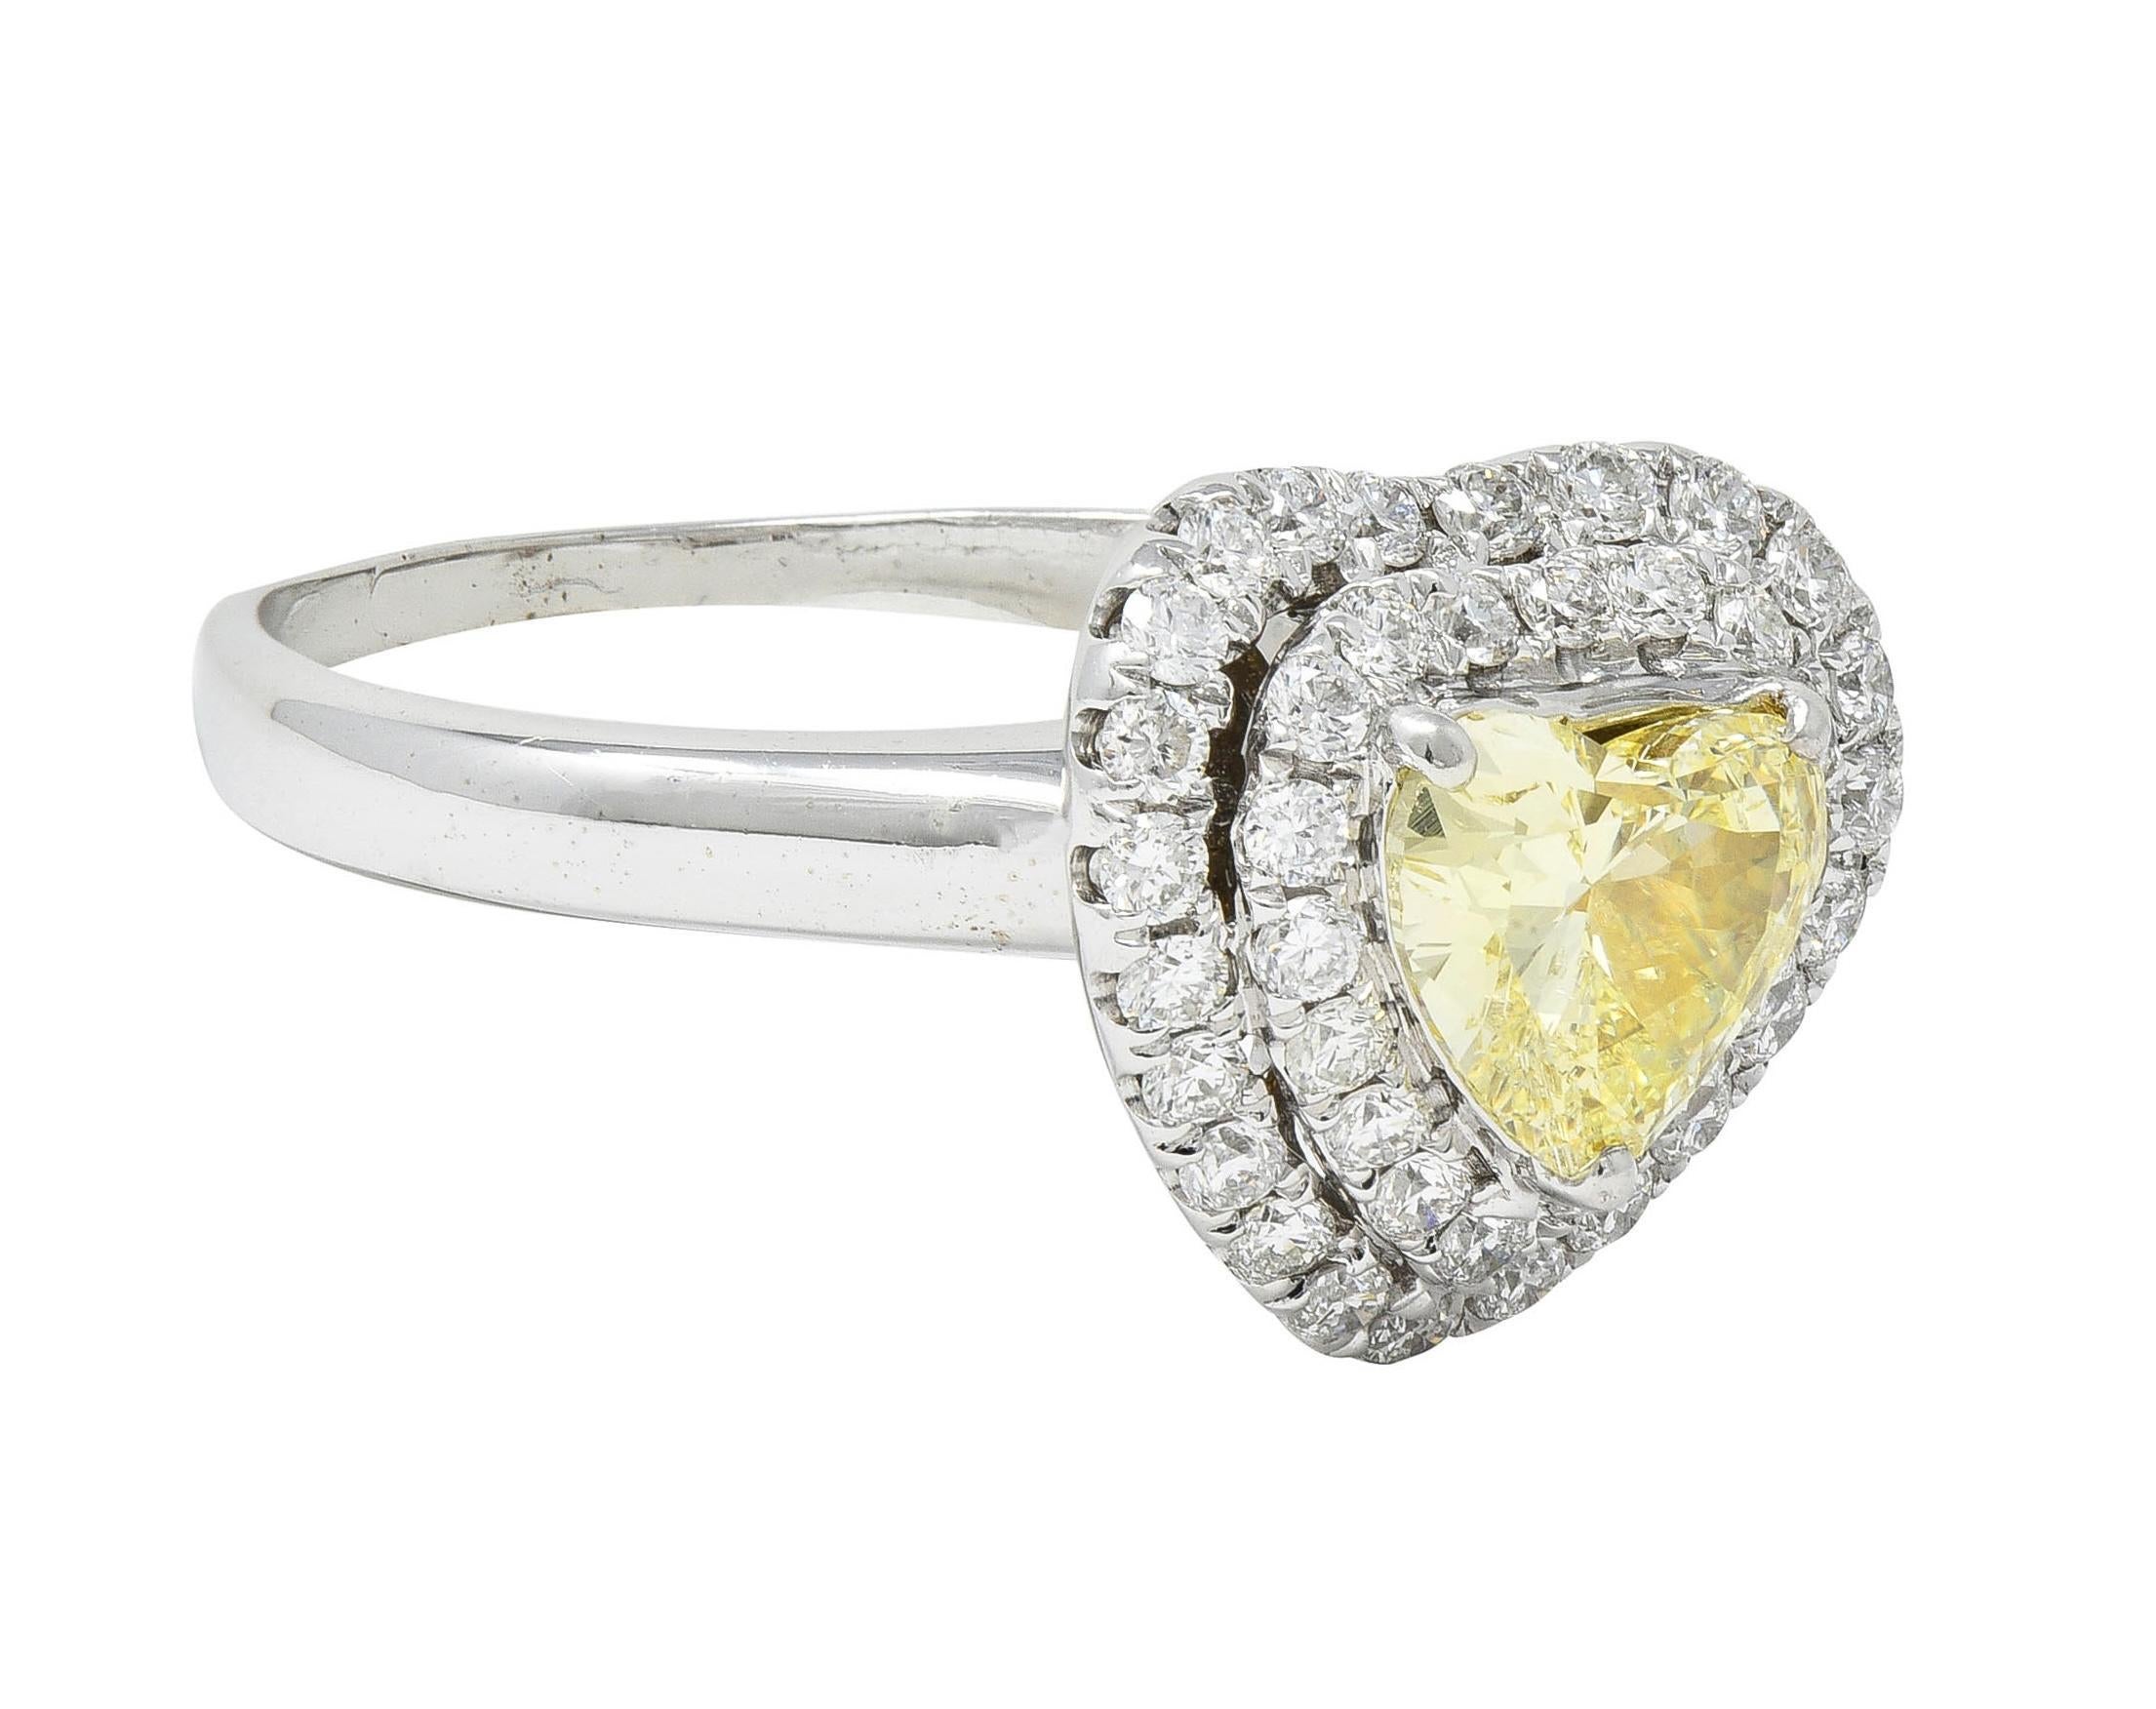 Centering a heart cut diamond weighing 0.90 carat total - natural fancy light yellow with SI2 clarity
Prong set in yellow gold with a contoured double halo surround of round brilliant cut diamonds
Weighing approximately 0.60 carat total - G color